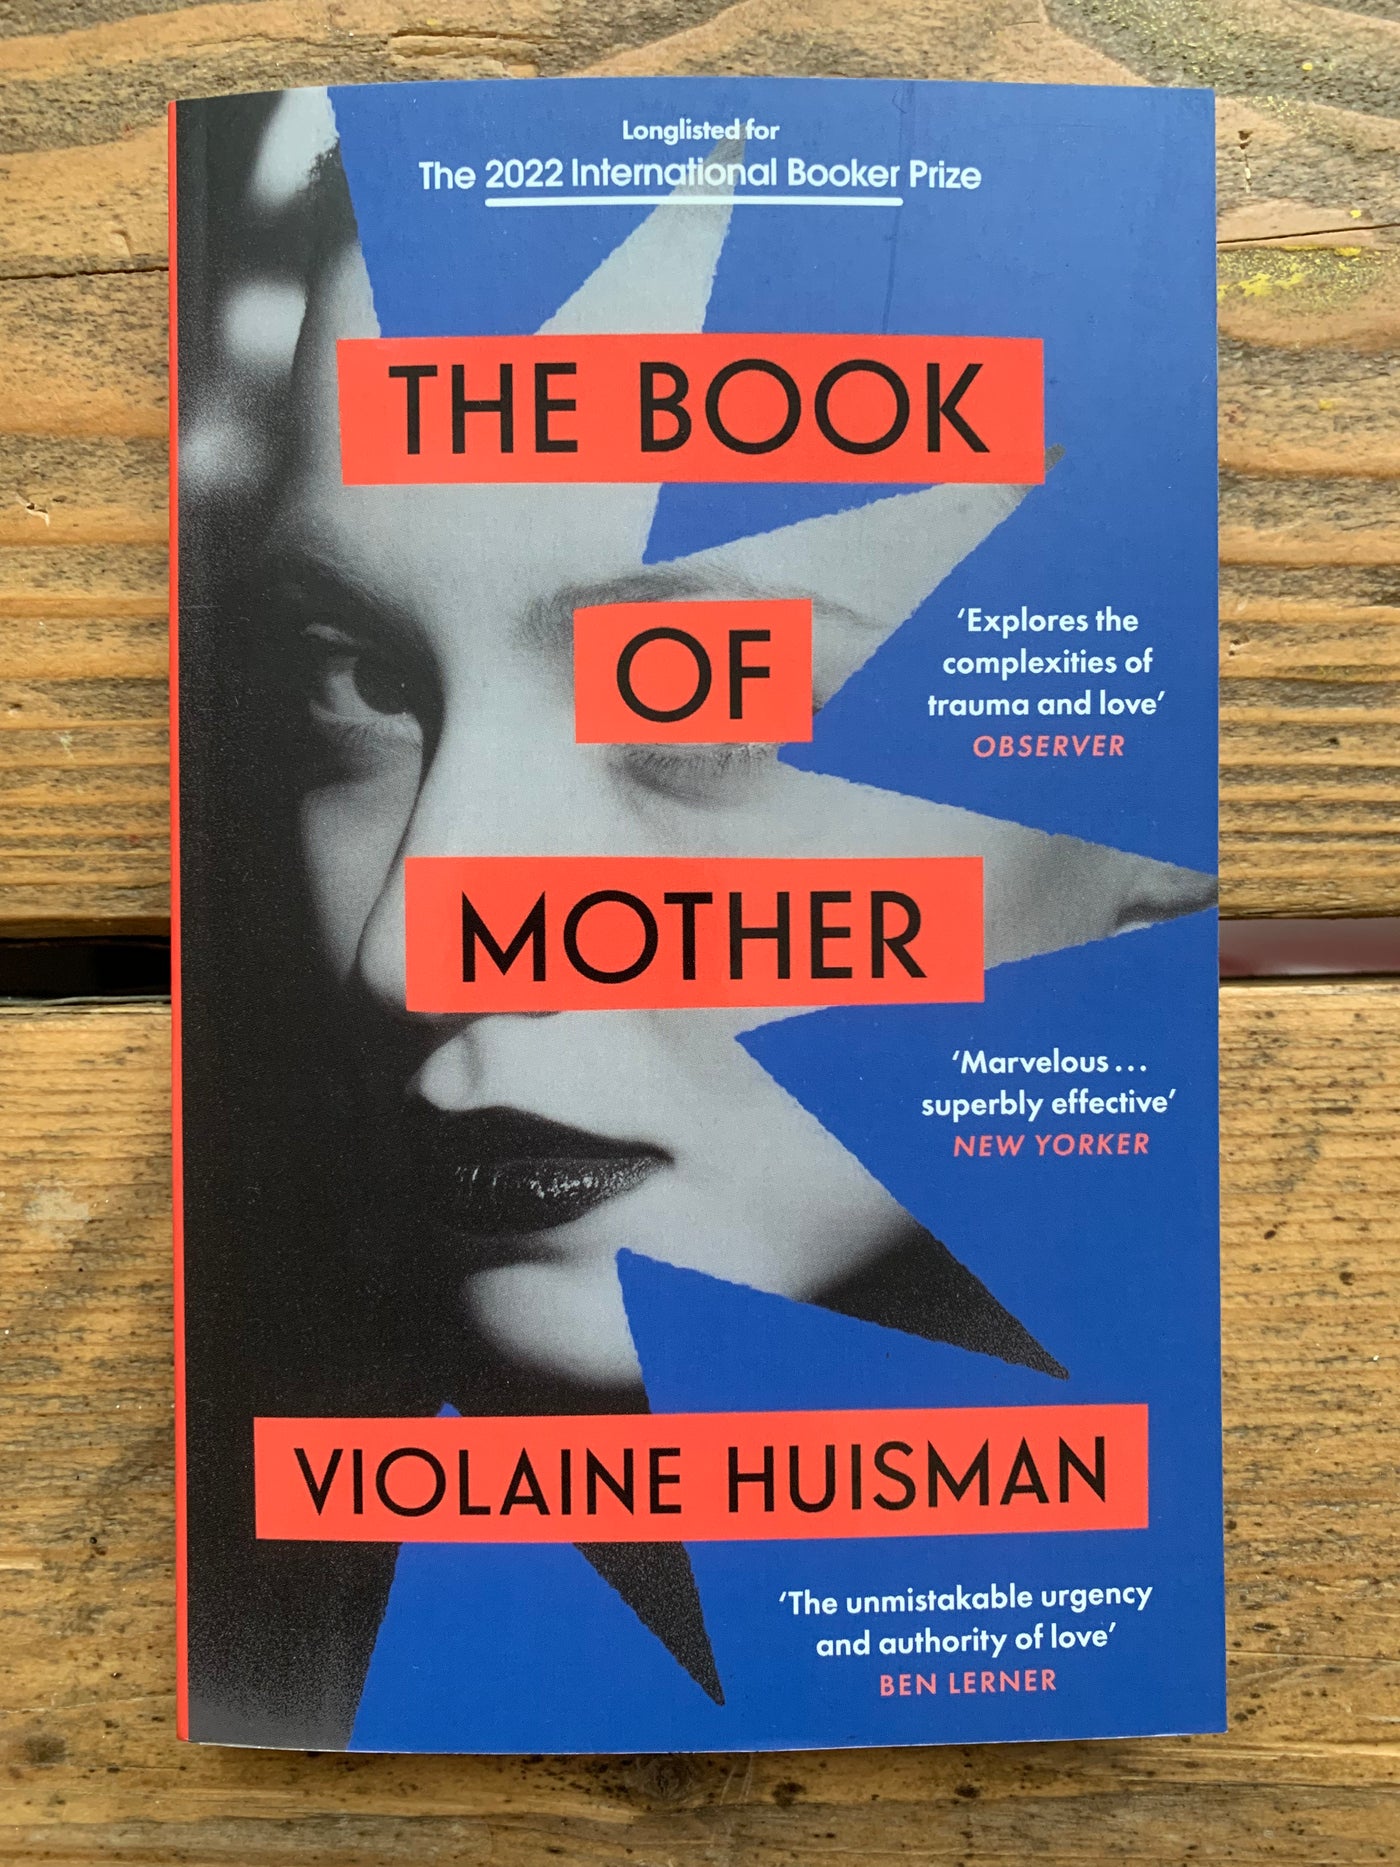 The Book of Mother